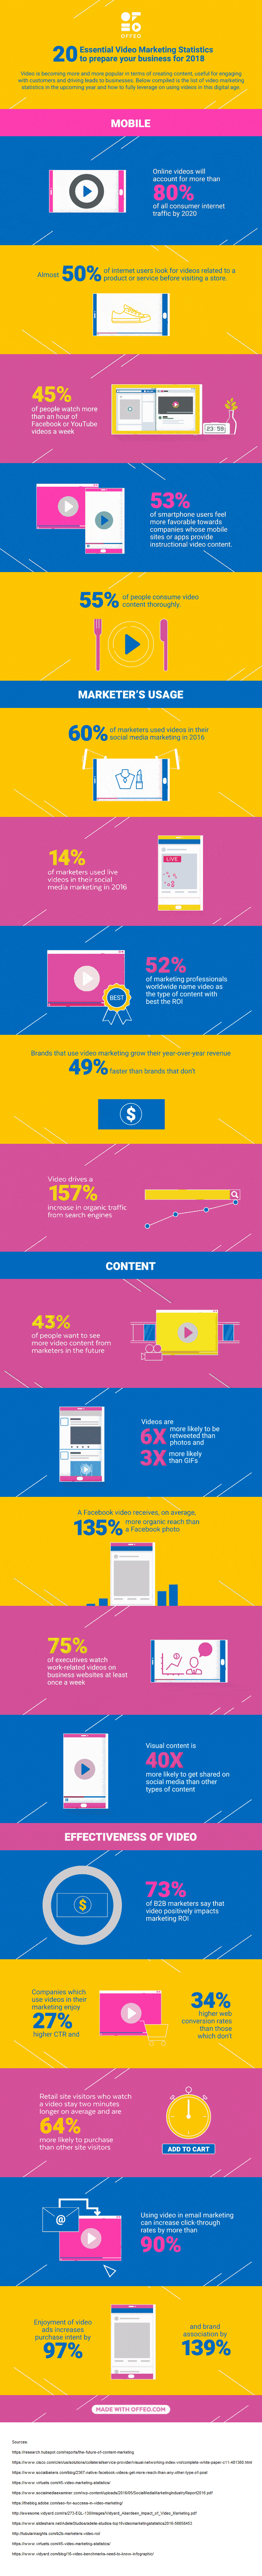 Video is becoming more and more popular in terms of creating content useful for engaging with customers and driving leads to businesses. Below compiled is the list of video marketing statistics in the upcoming year and how to fully leverage on using videos in this digital age.